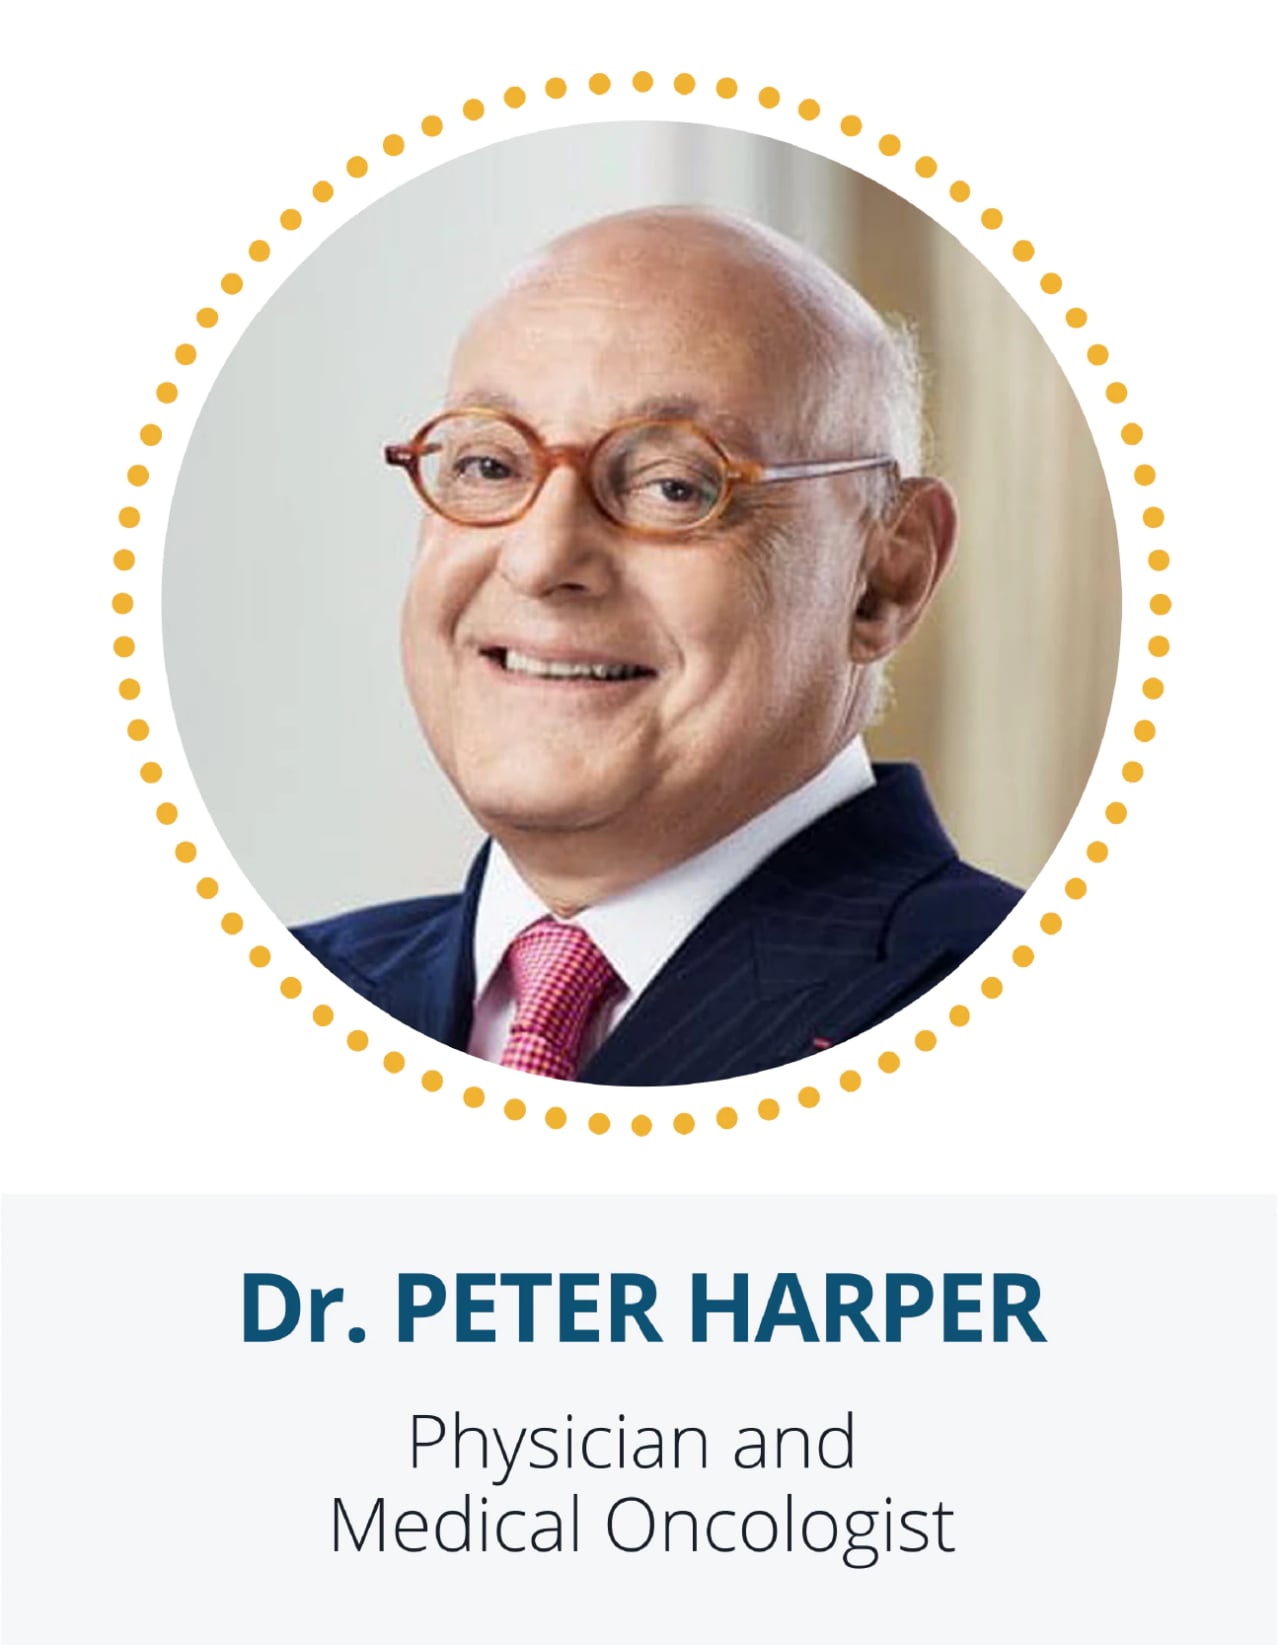 Dr. Peter Harper, Physician and Medical Oncologist